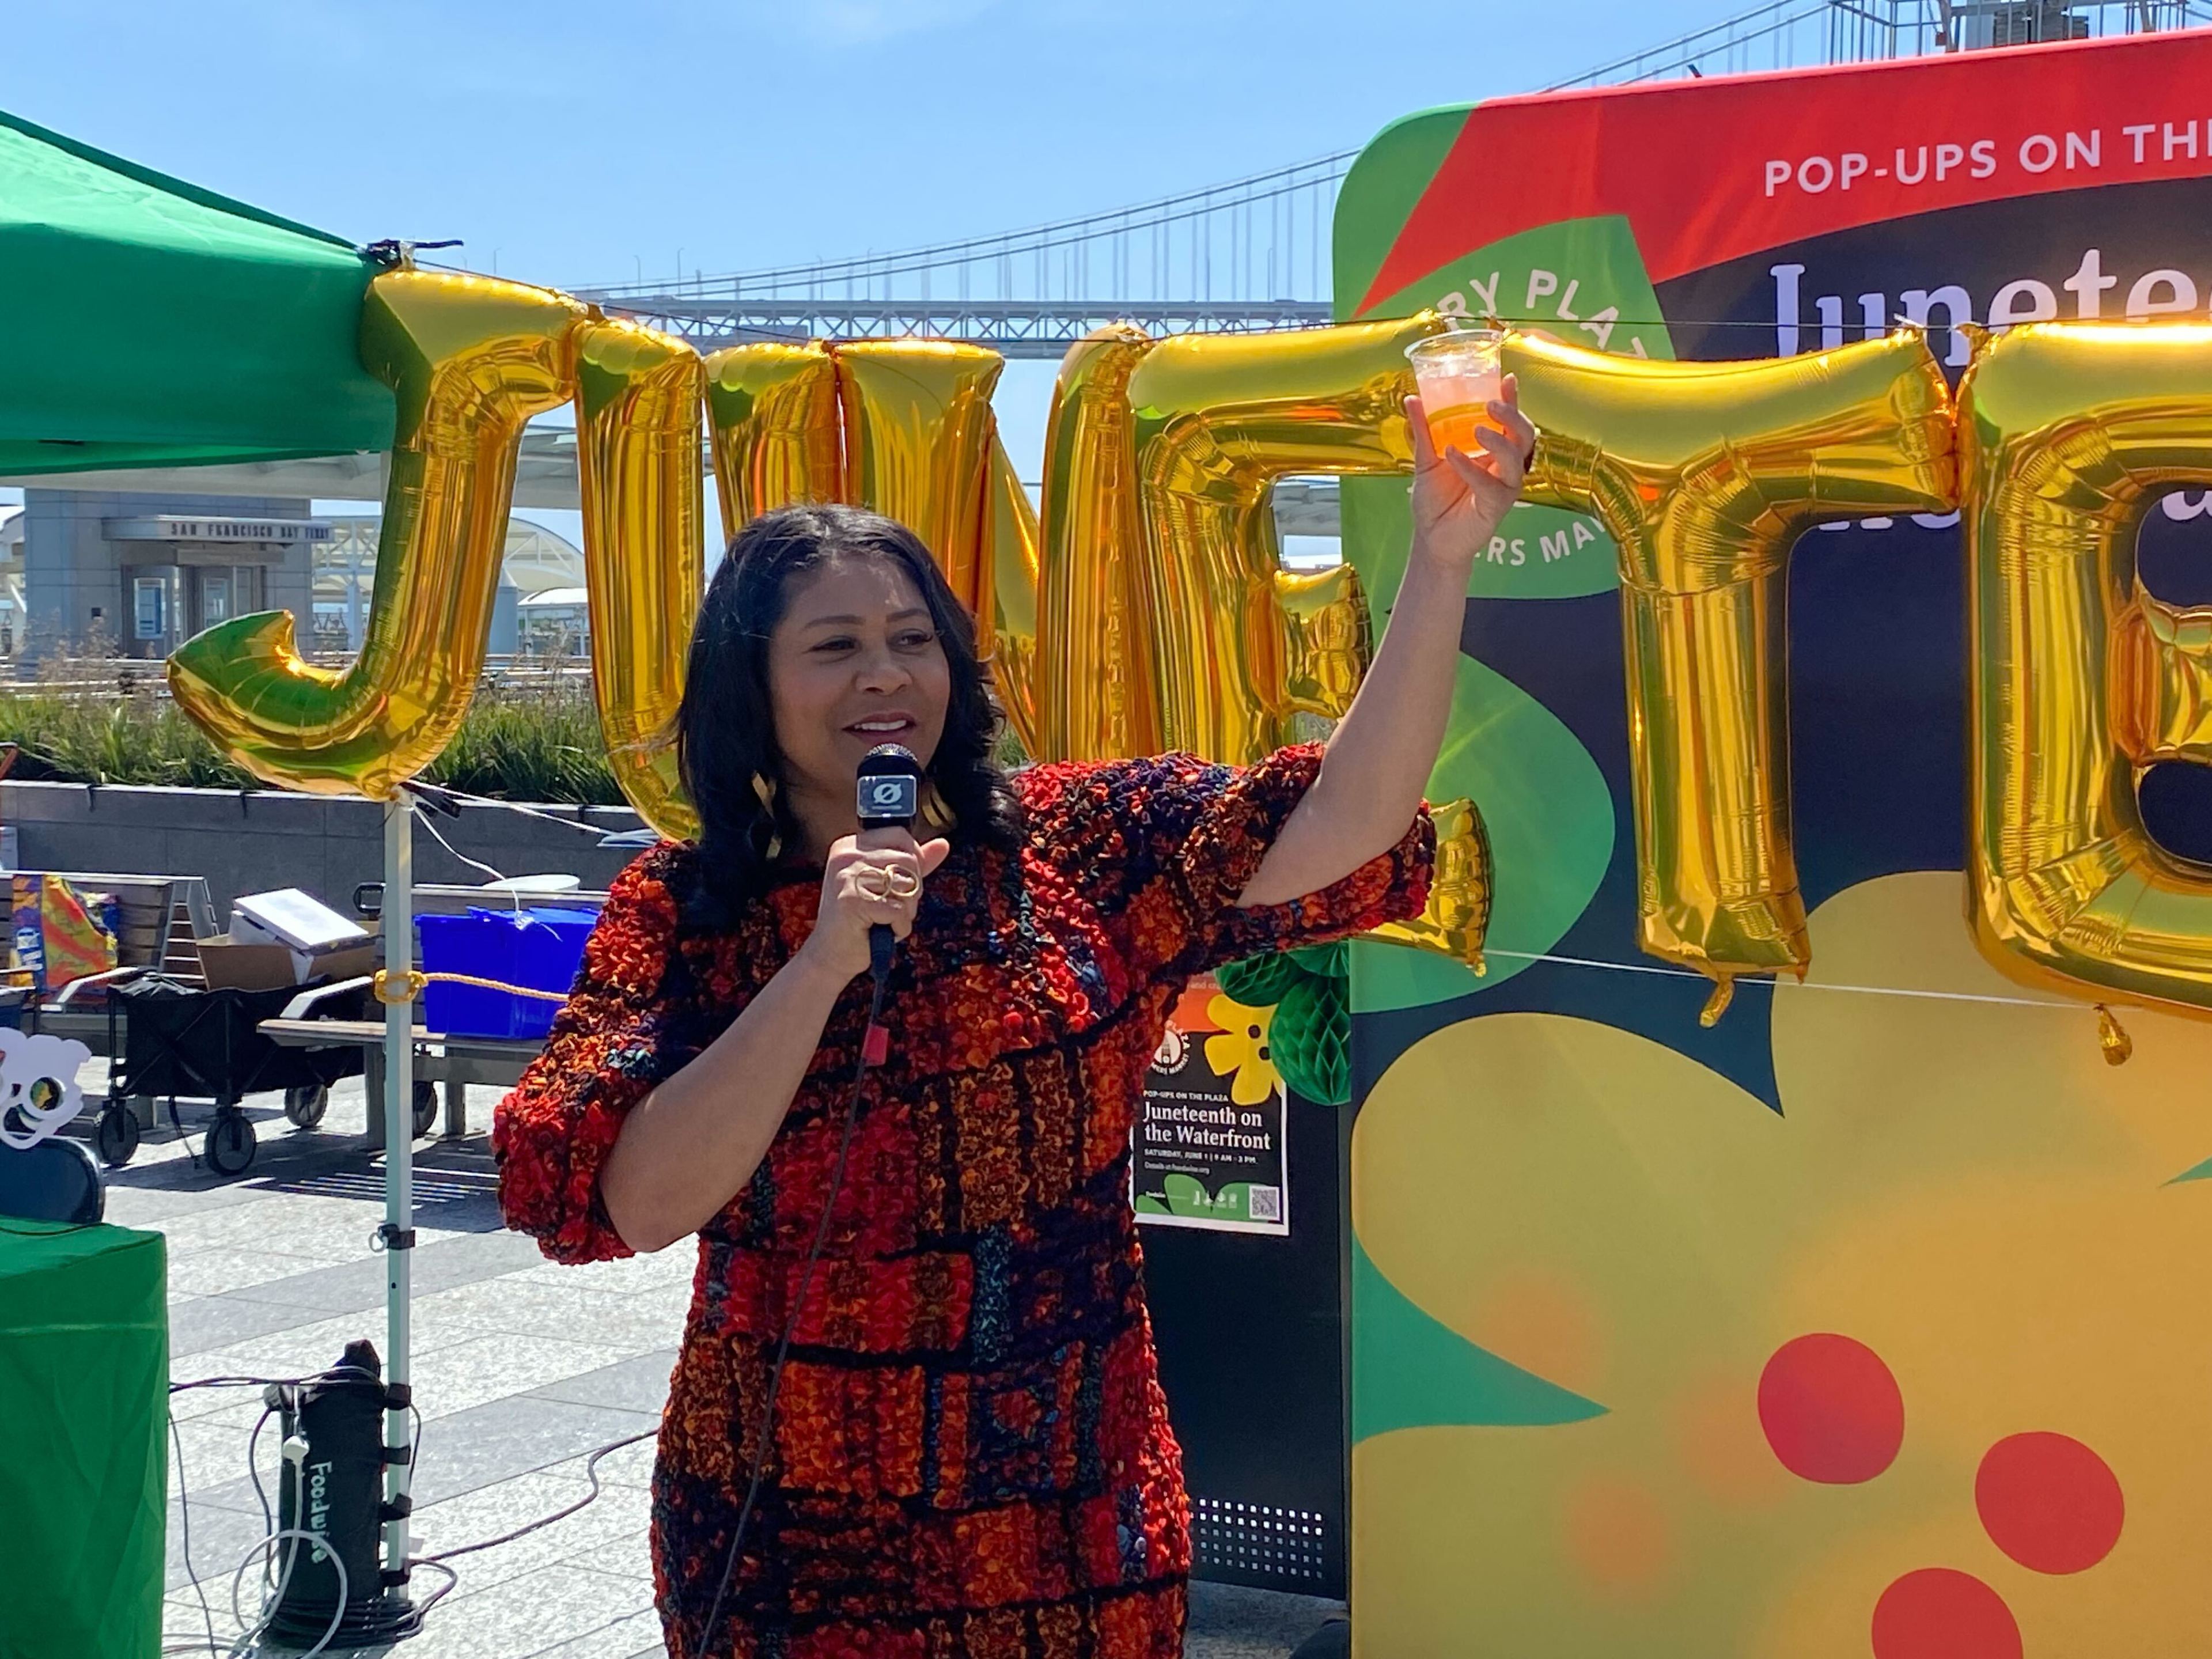 A woman in a patterned dress speaks into a microphone and raises a drink. Behind her, gold balloons spell "JUNETEENTH." A bridge and a green tent are visible in the background.